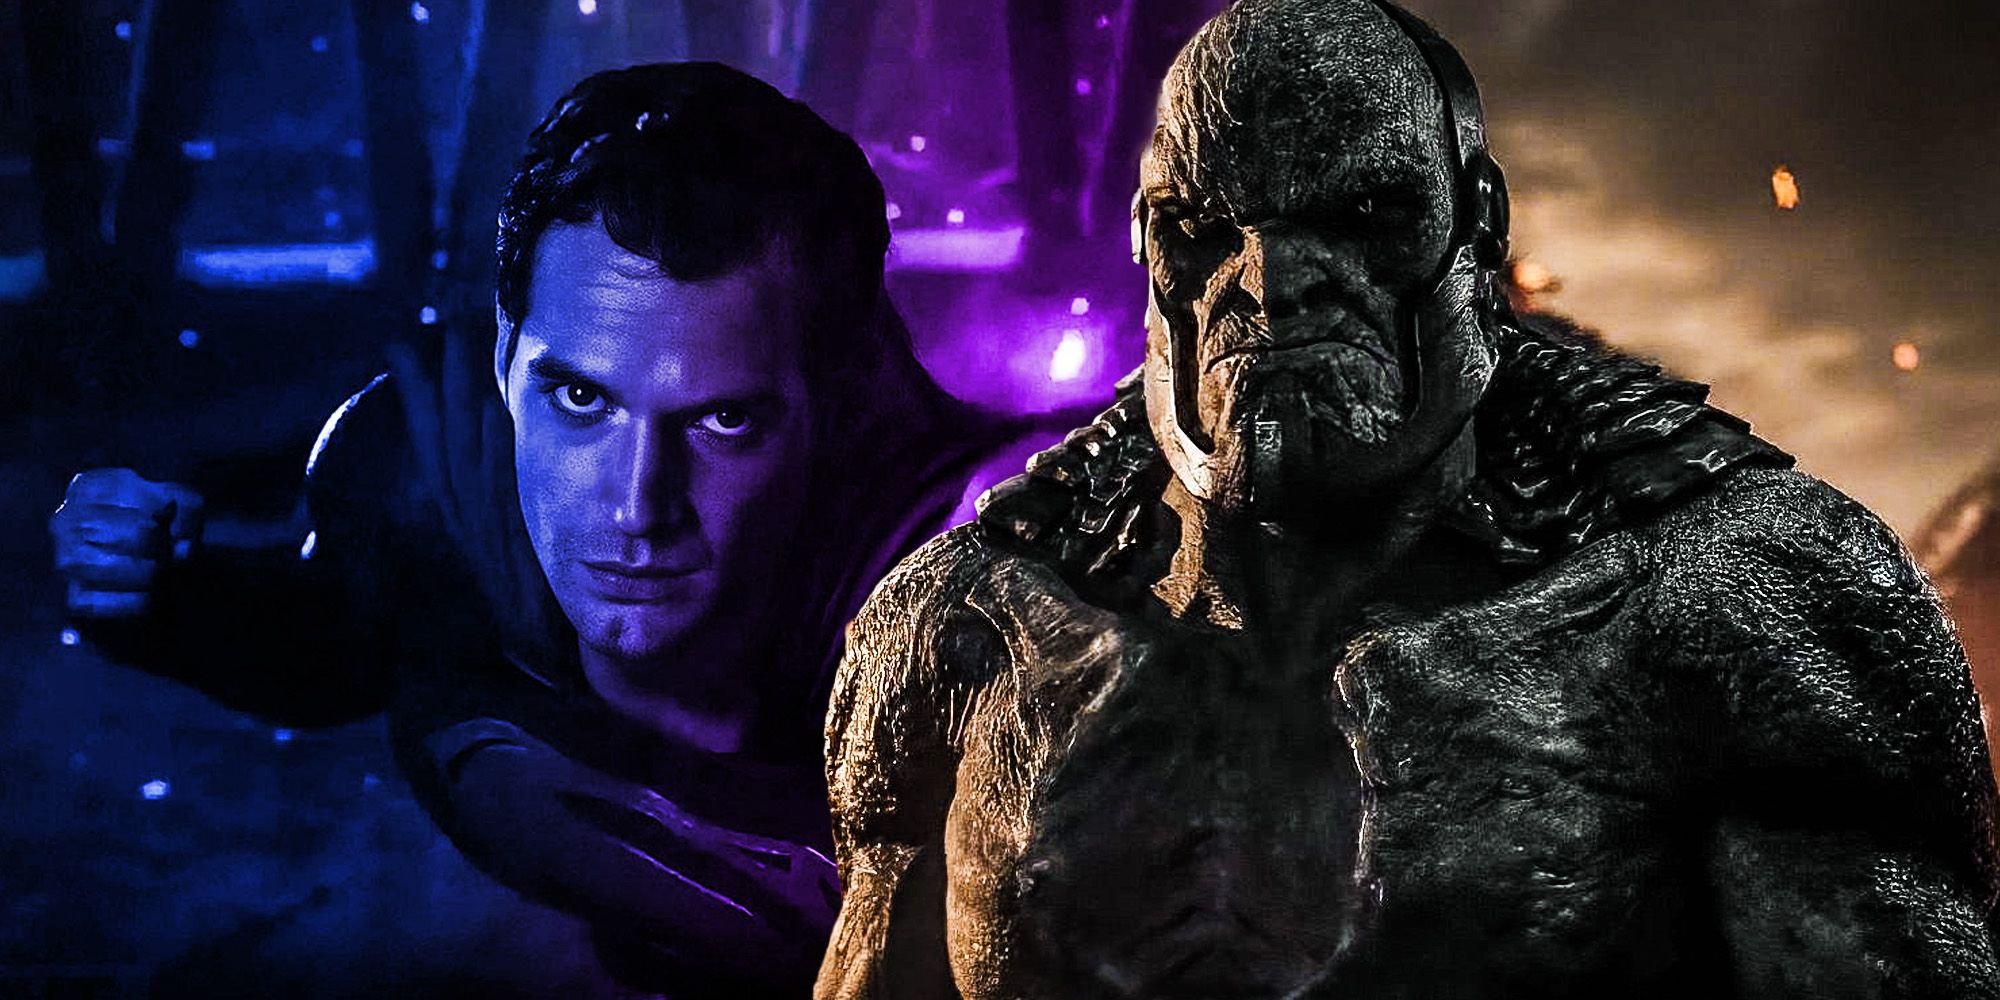 Darkseid Superman who is more powerful Justice League Snyder cut